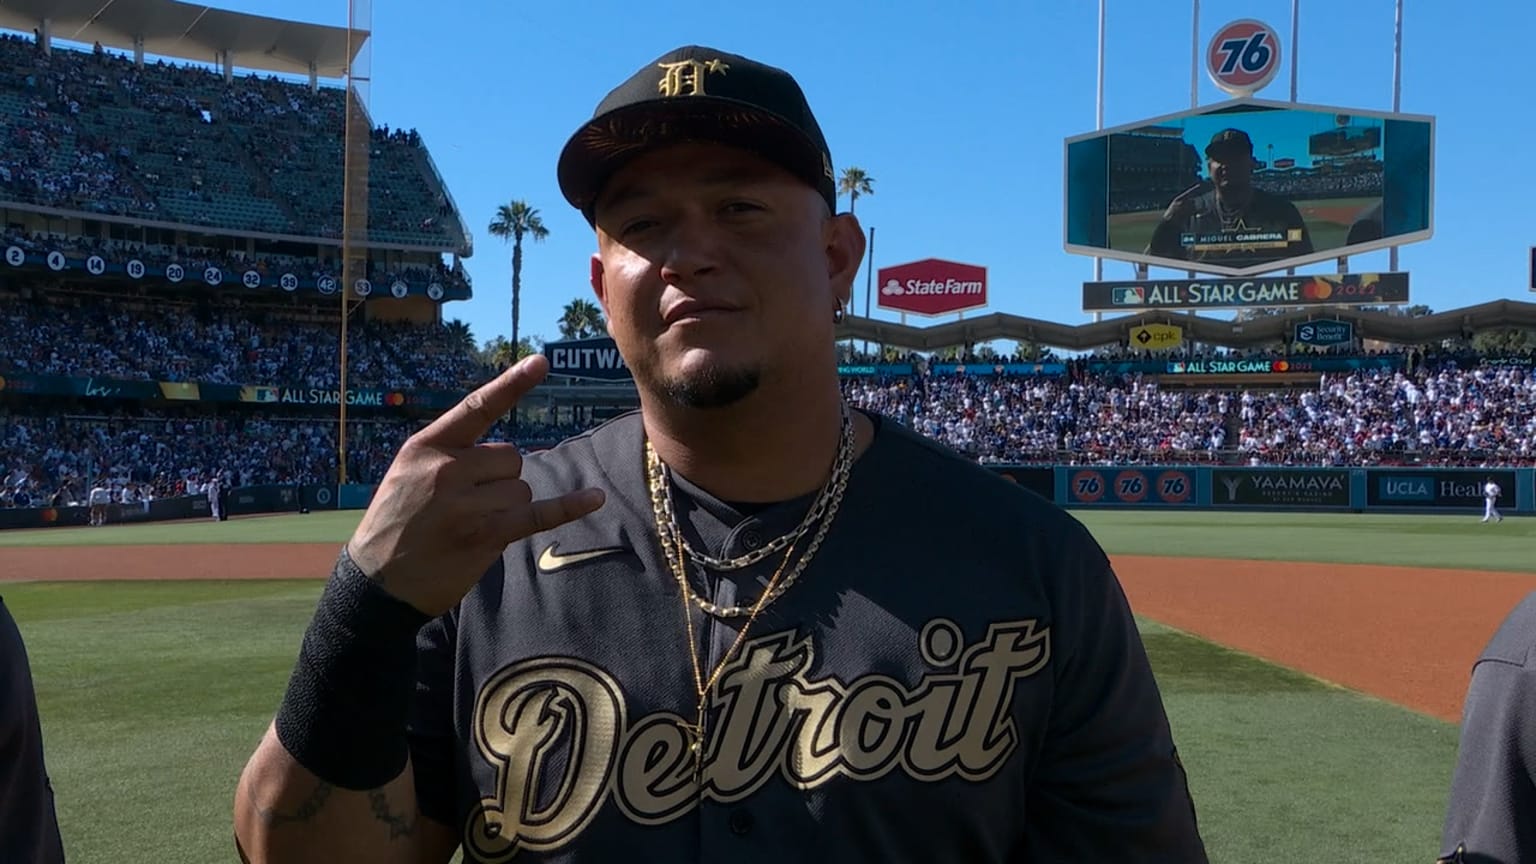 Miguel Cabrera to play in 2022 All-Star Game